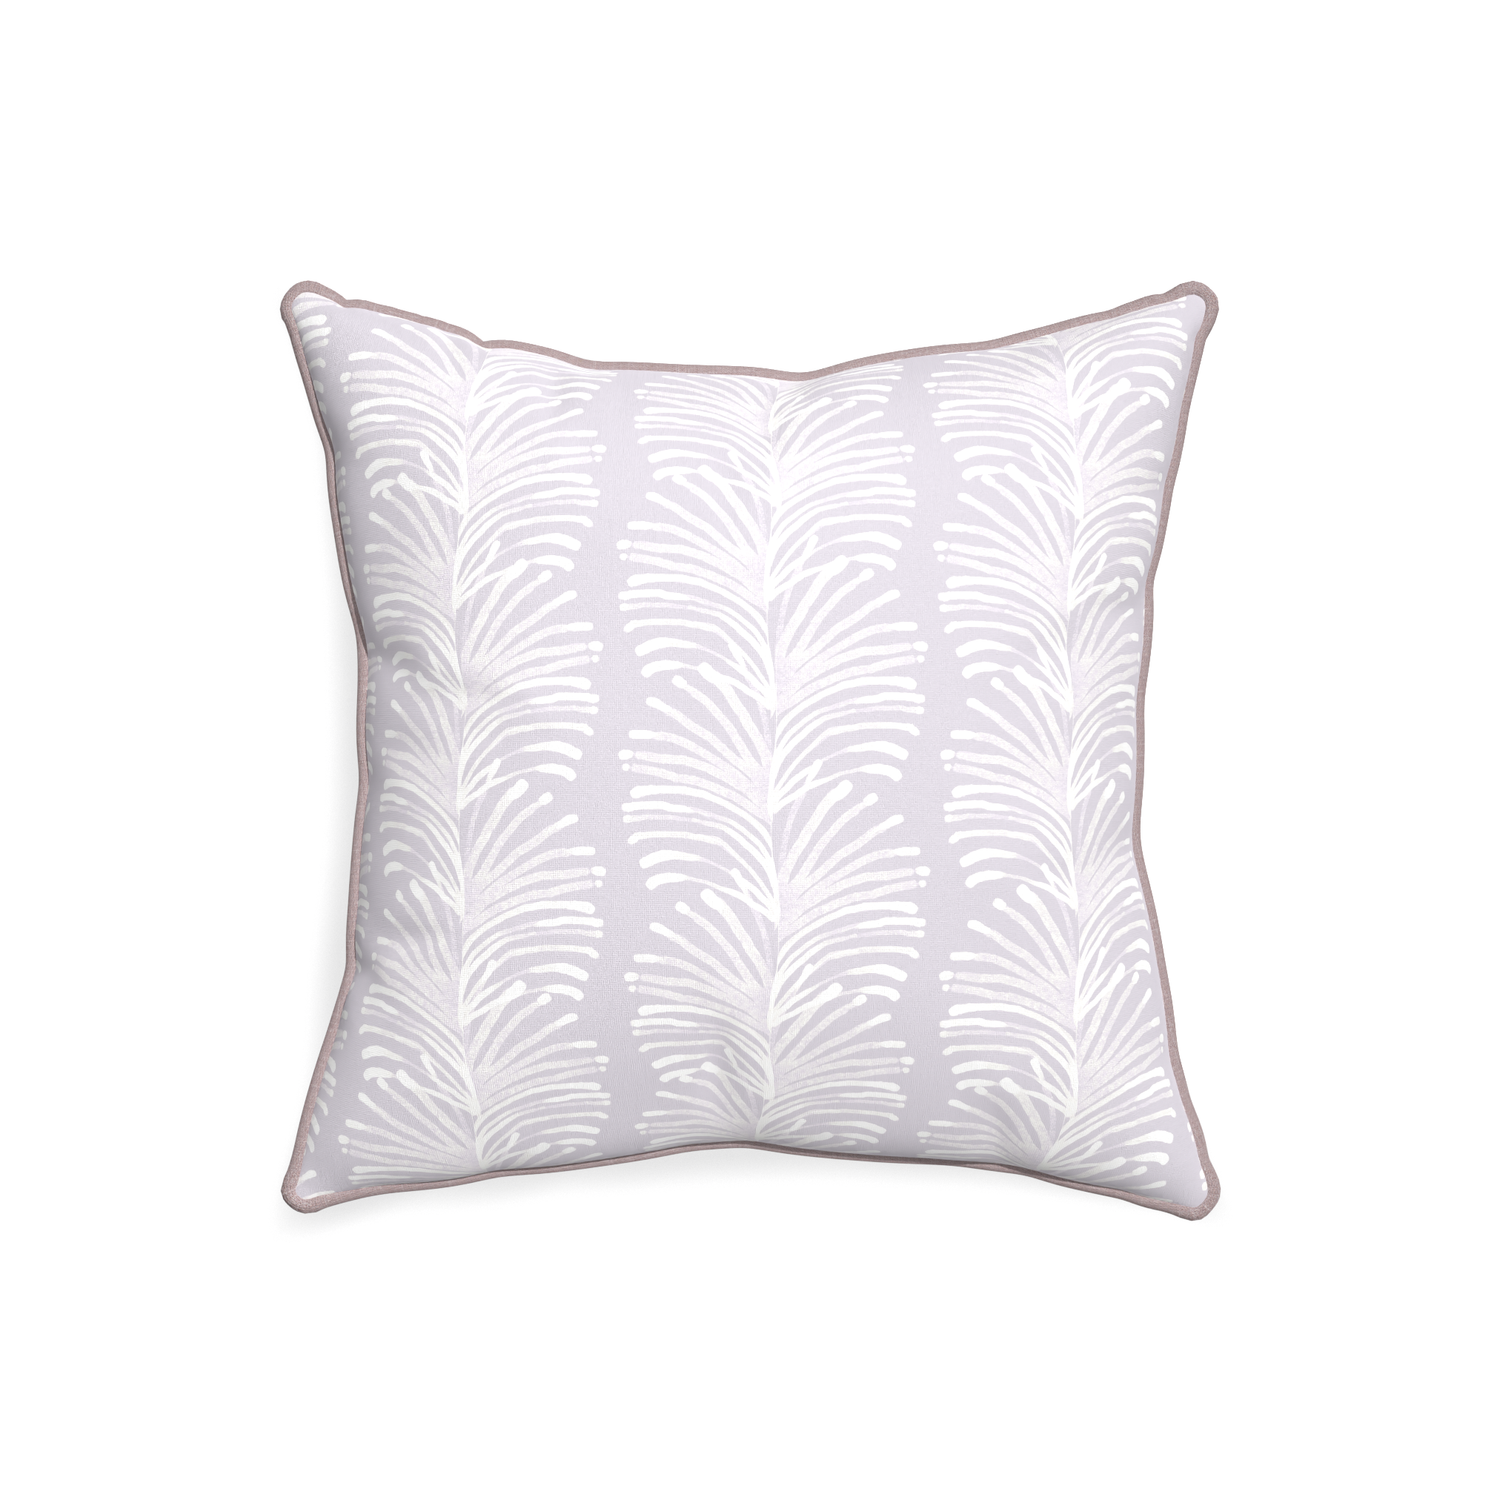 20-square emma lavender custom lavender botanical stripepillow with orchid piping on white background